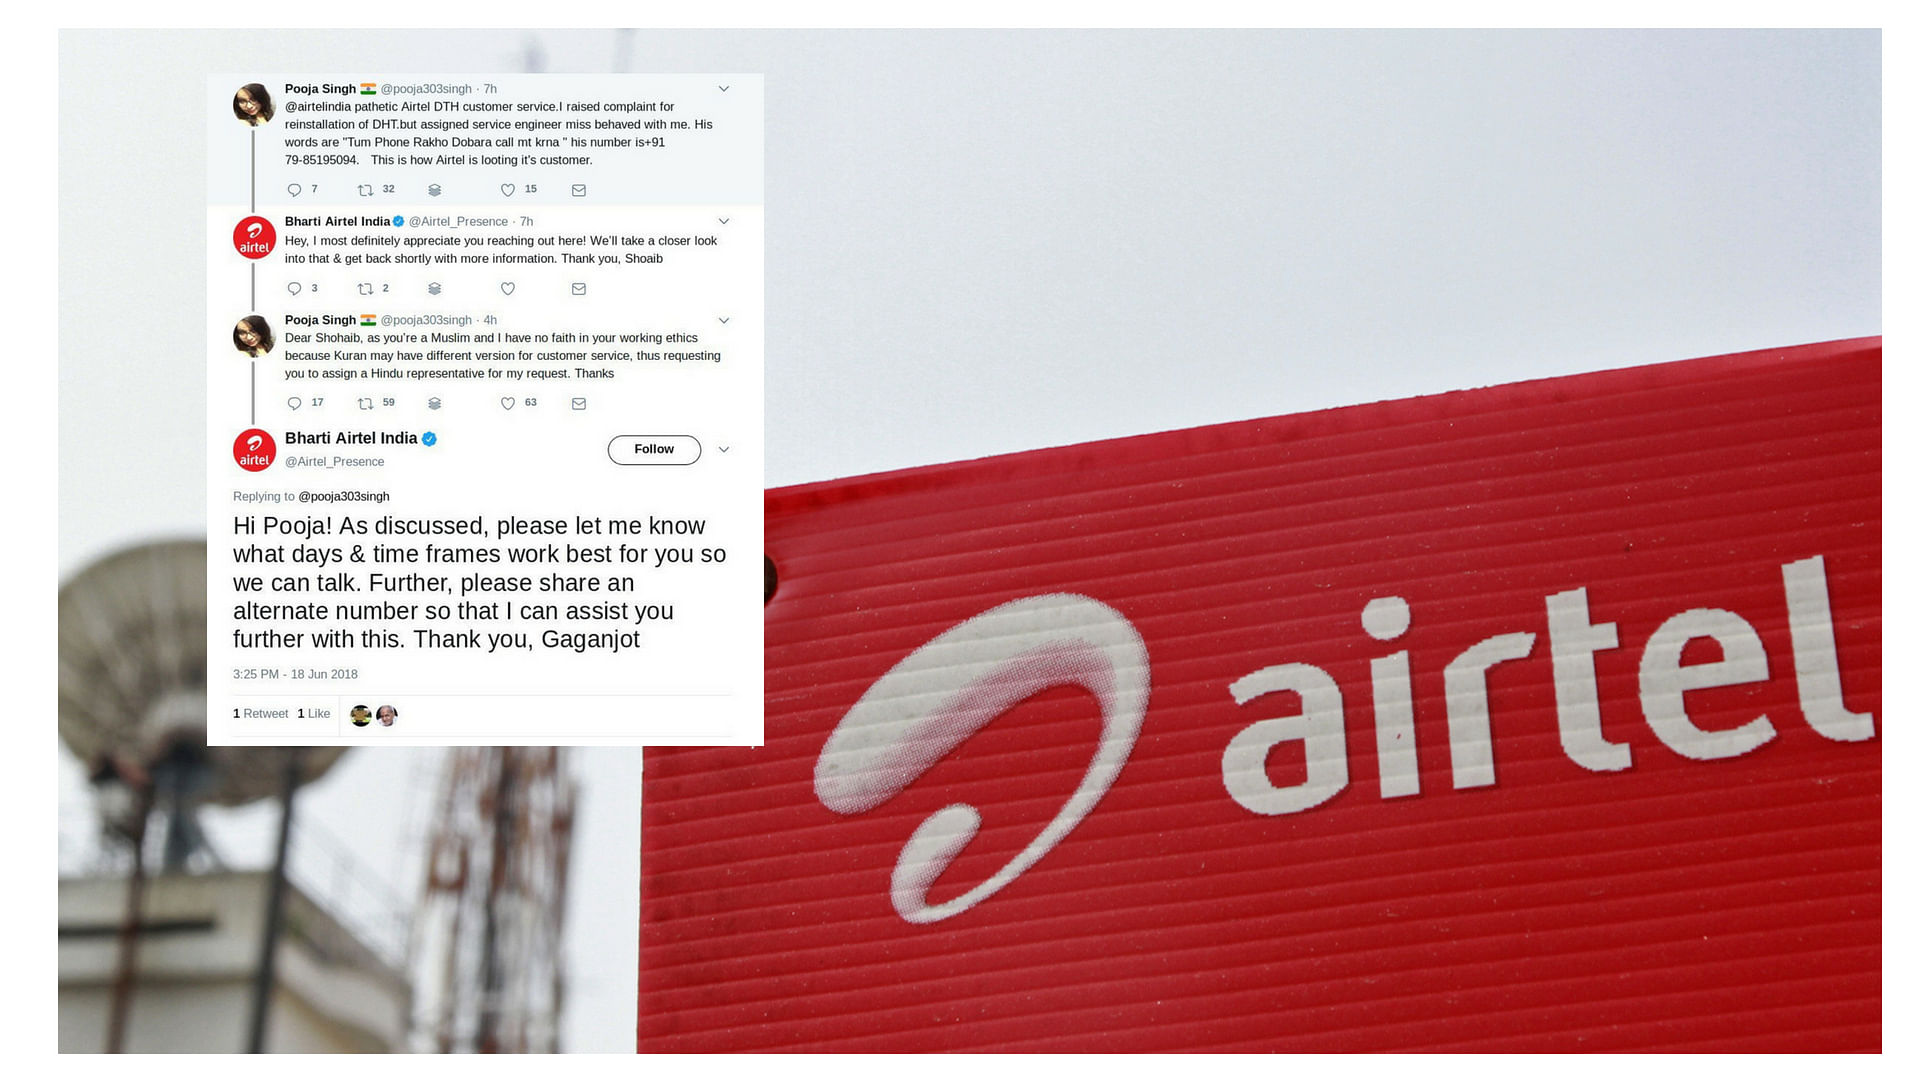 Airtel India landed itself in a huge controversy after agreeing to the demand of a customer for a Hindu representative.